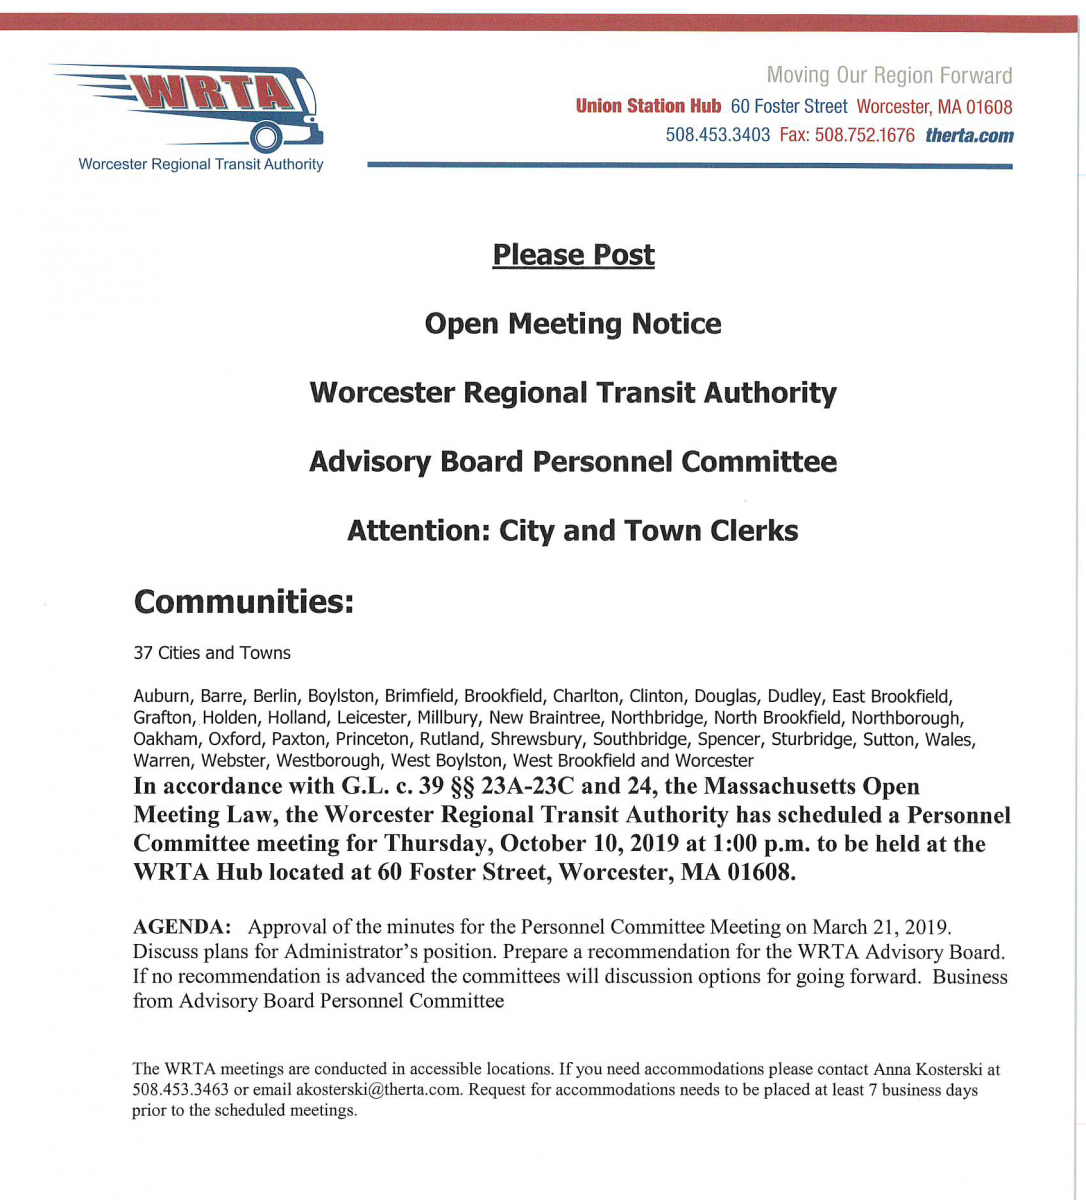 This is the agenda for the October 10, 2019 meeting of the WRTA Personnel Advisory Board